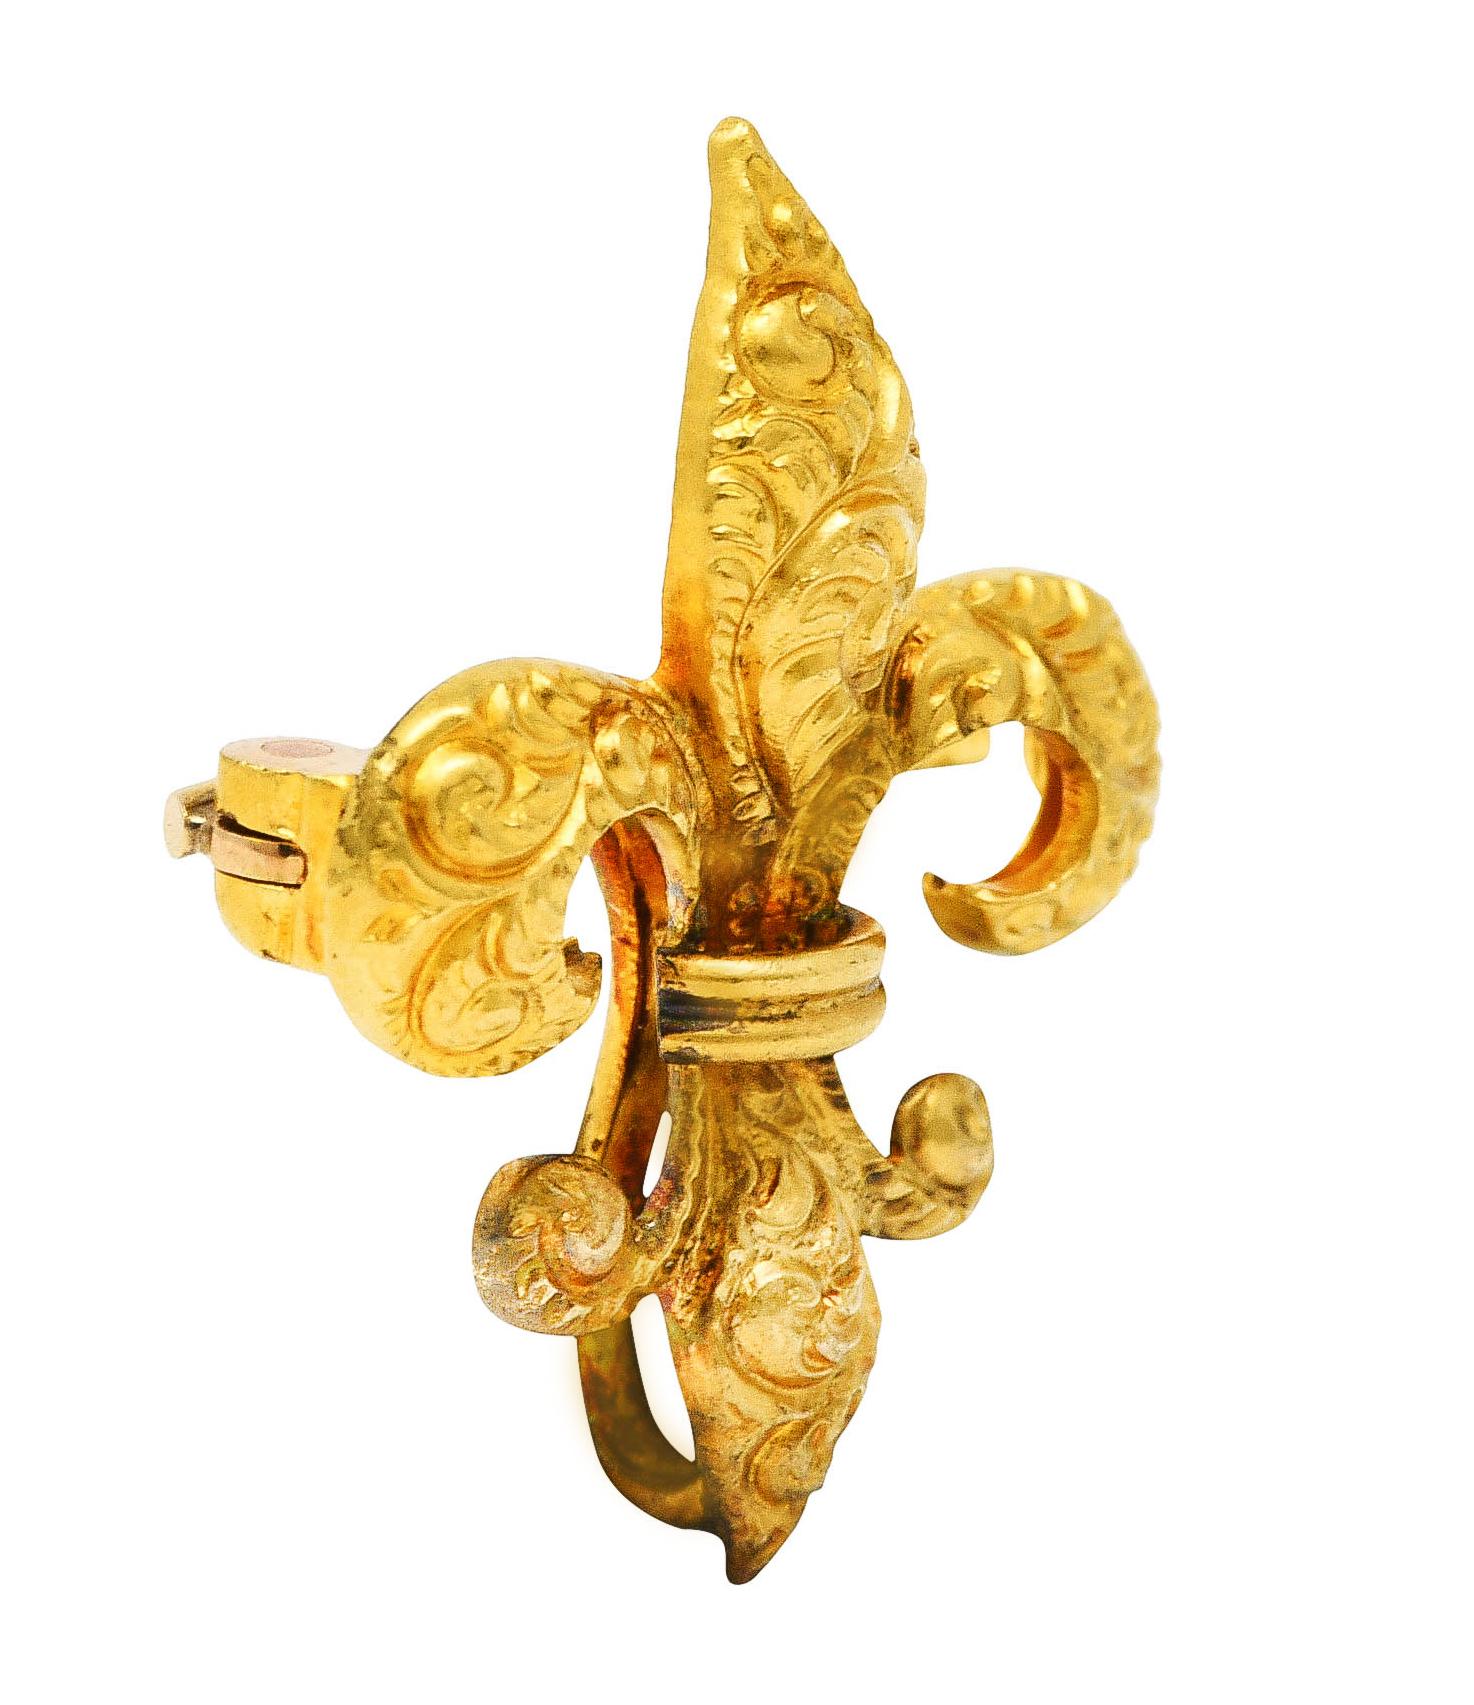 Pendant brooch designed as stylized fleur-de-lis symbol

Featuring engraved curling plumes

With ridged central banding

Completed by hinged pin stem and looping bale for optional drop, watch or locket

Stamped 14k for 14 karat gold

Circa: